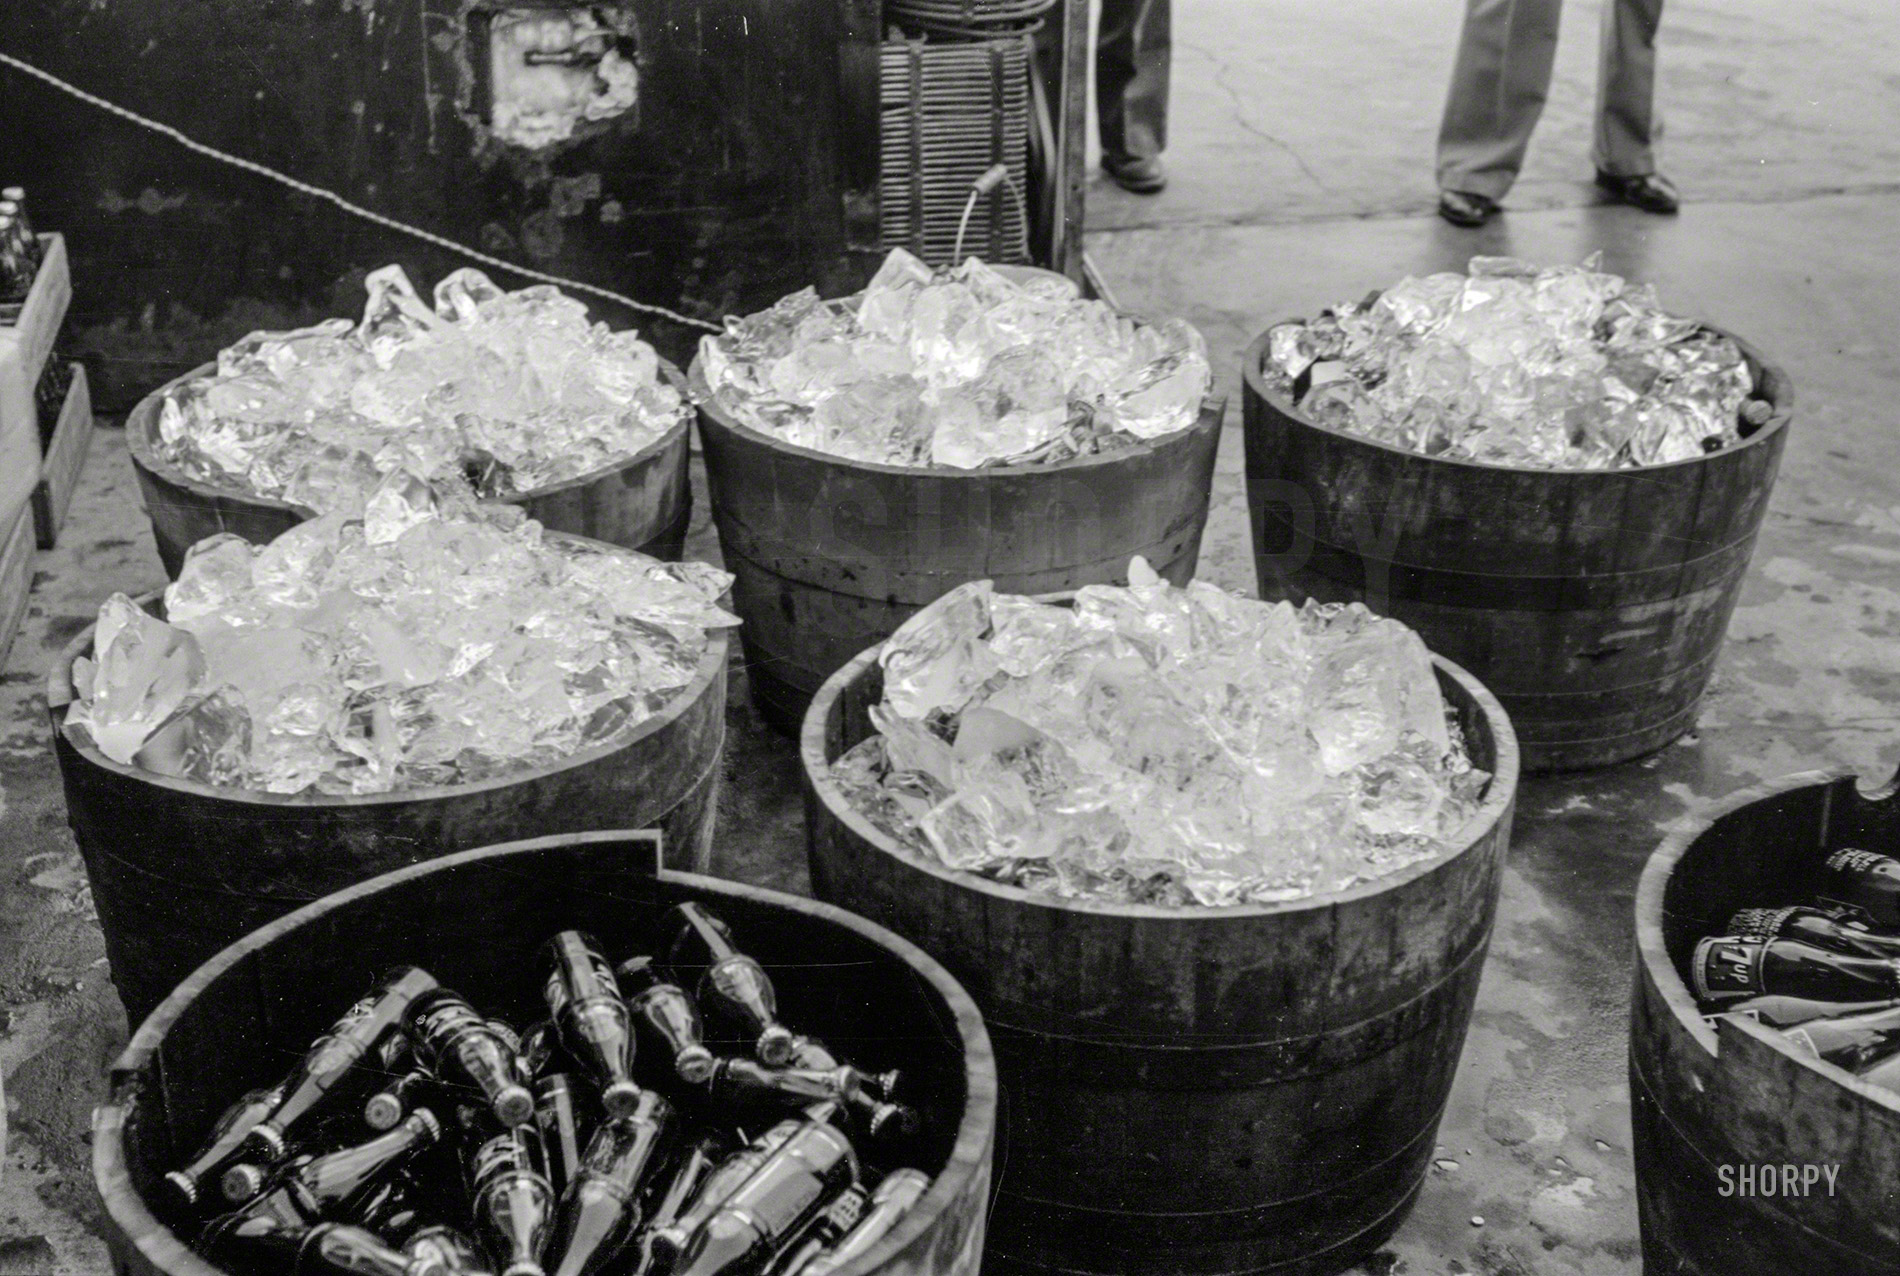 October 1938. "Ice at refreshment stand, state fair, Donaldsonville, Louisiana." 35mm negative by Russell Lee, Farm Security Administration. View full size.